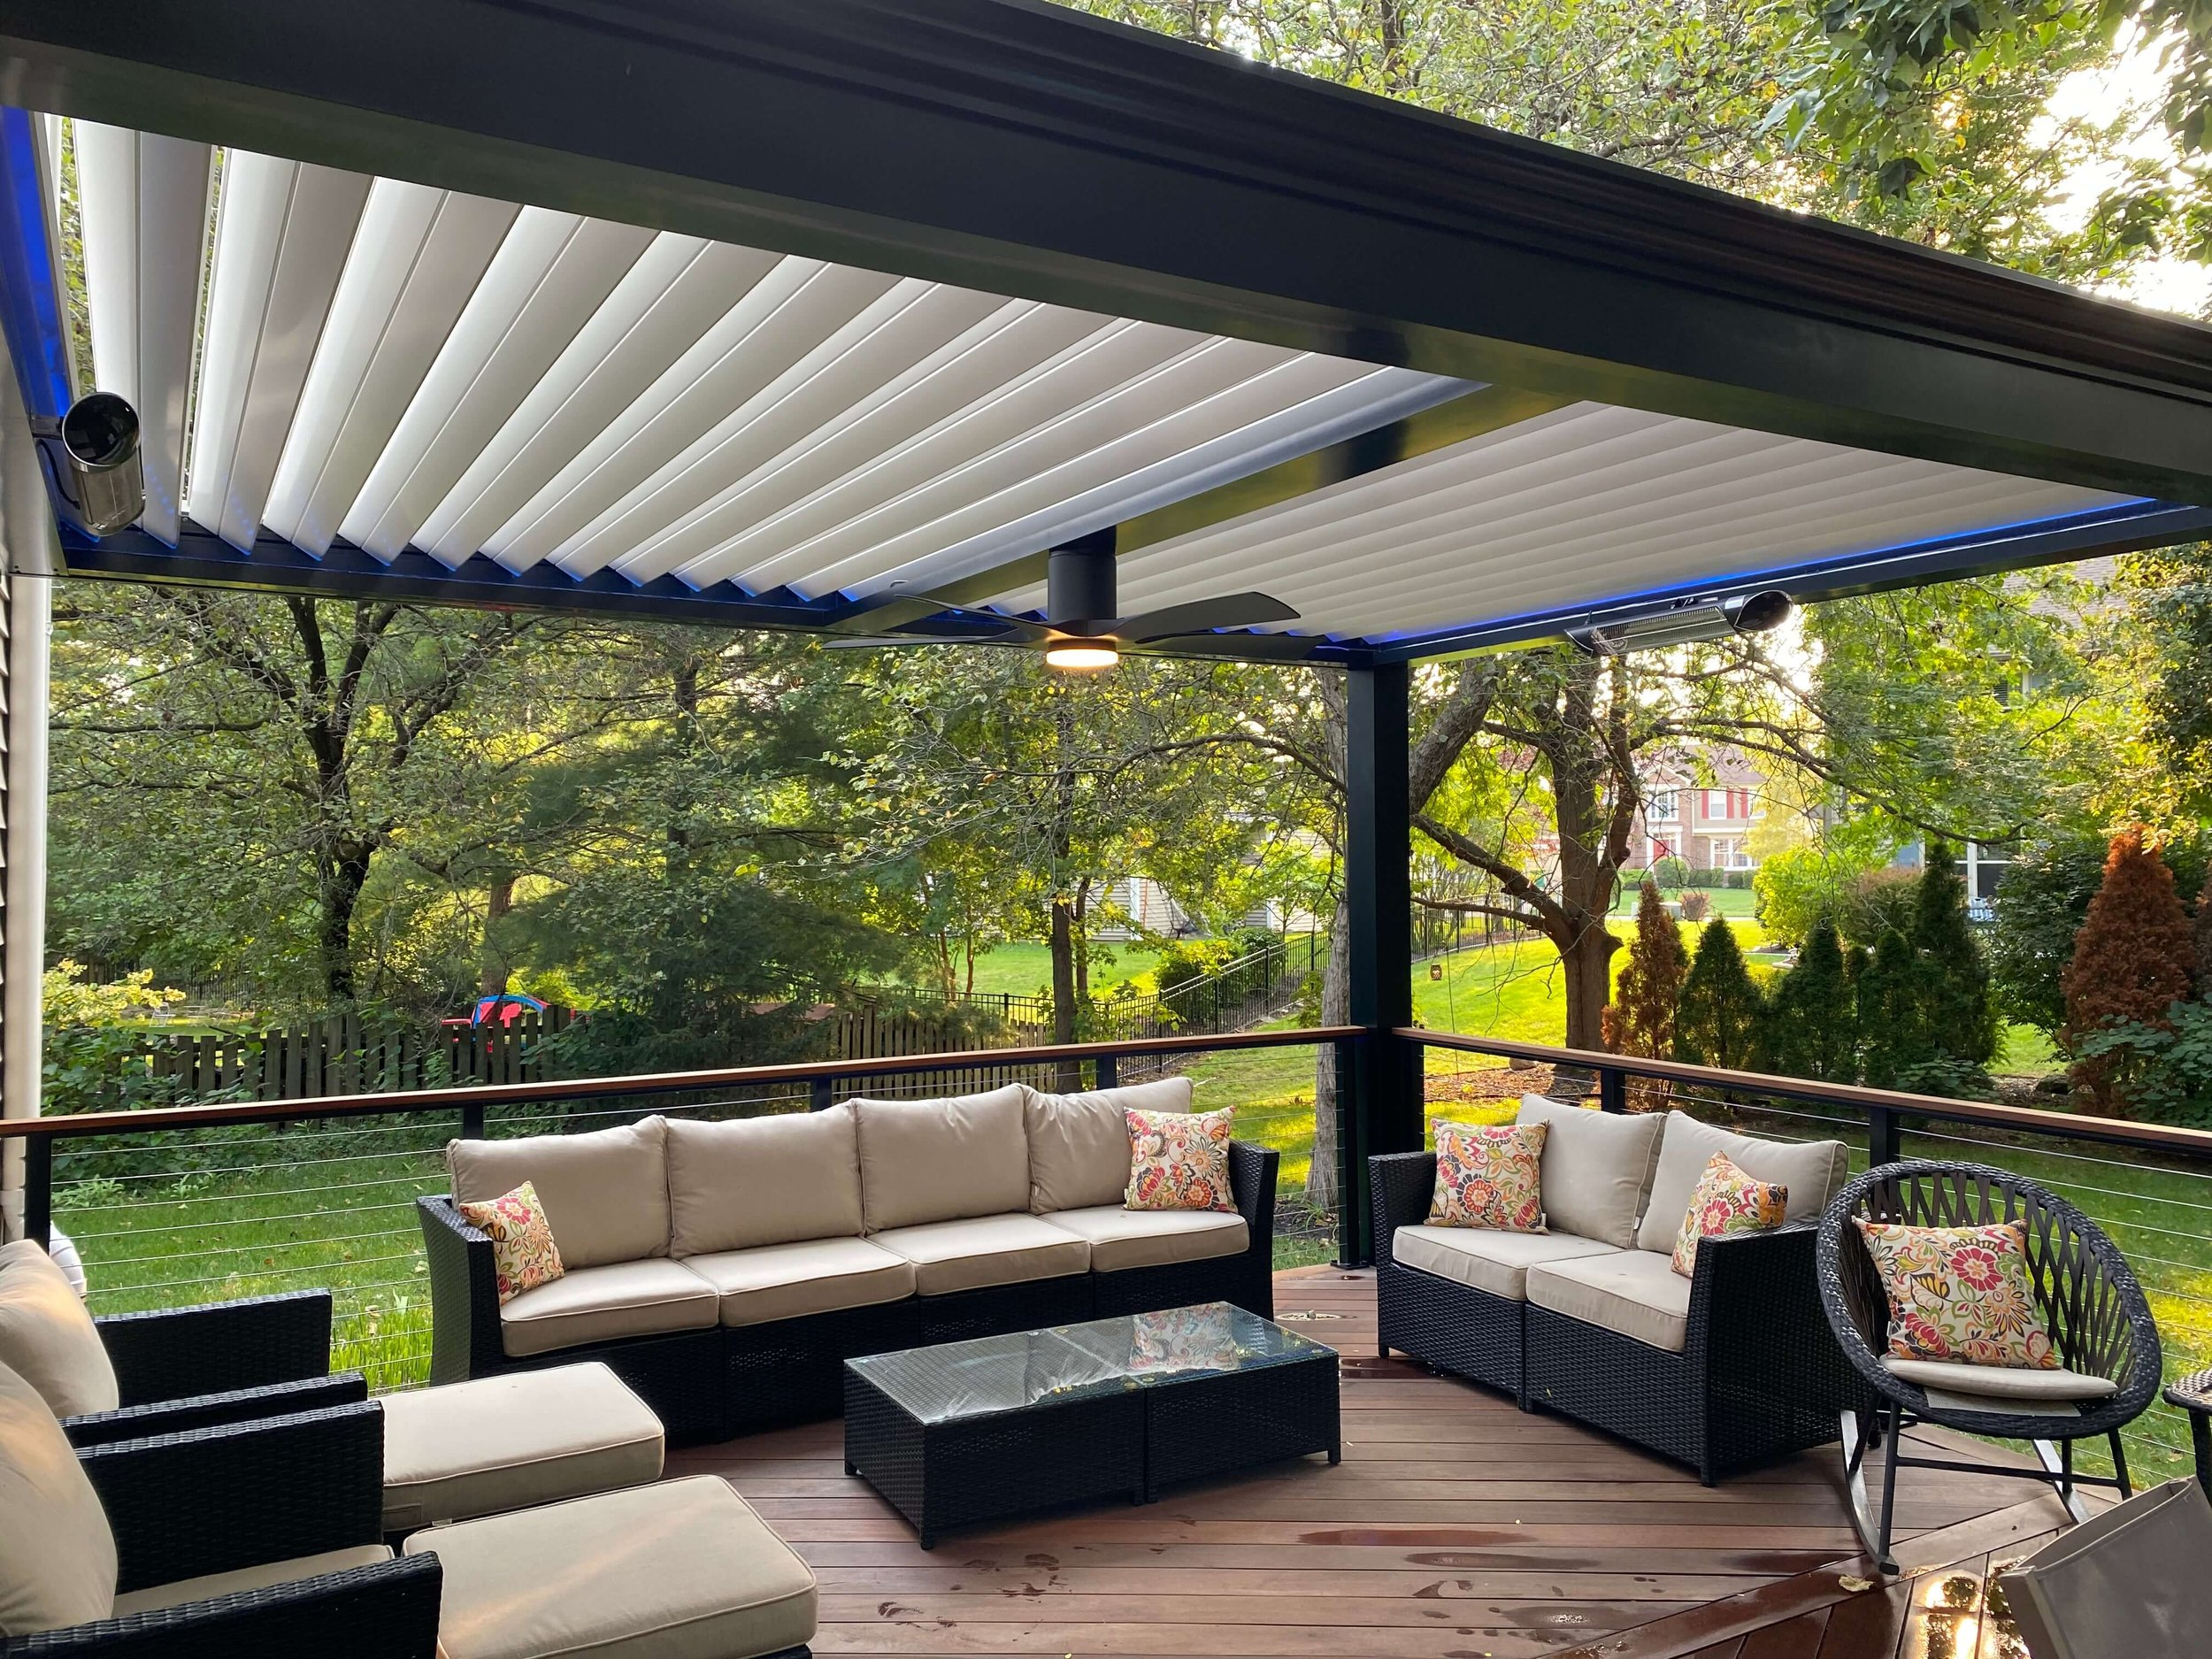 Pergola Is Able To Offer Shade From Sun